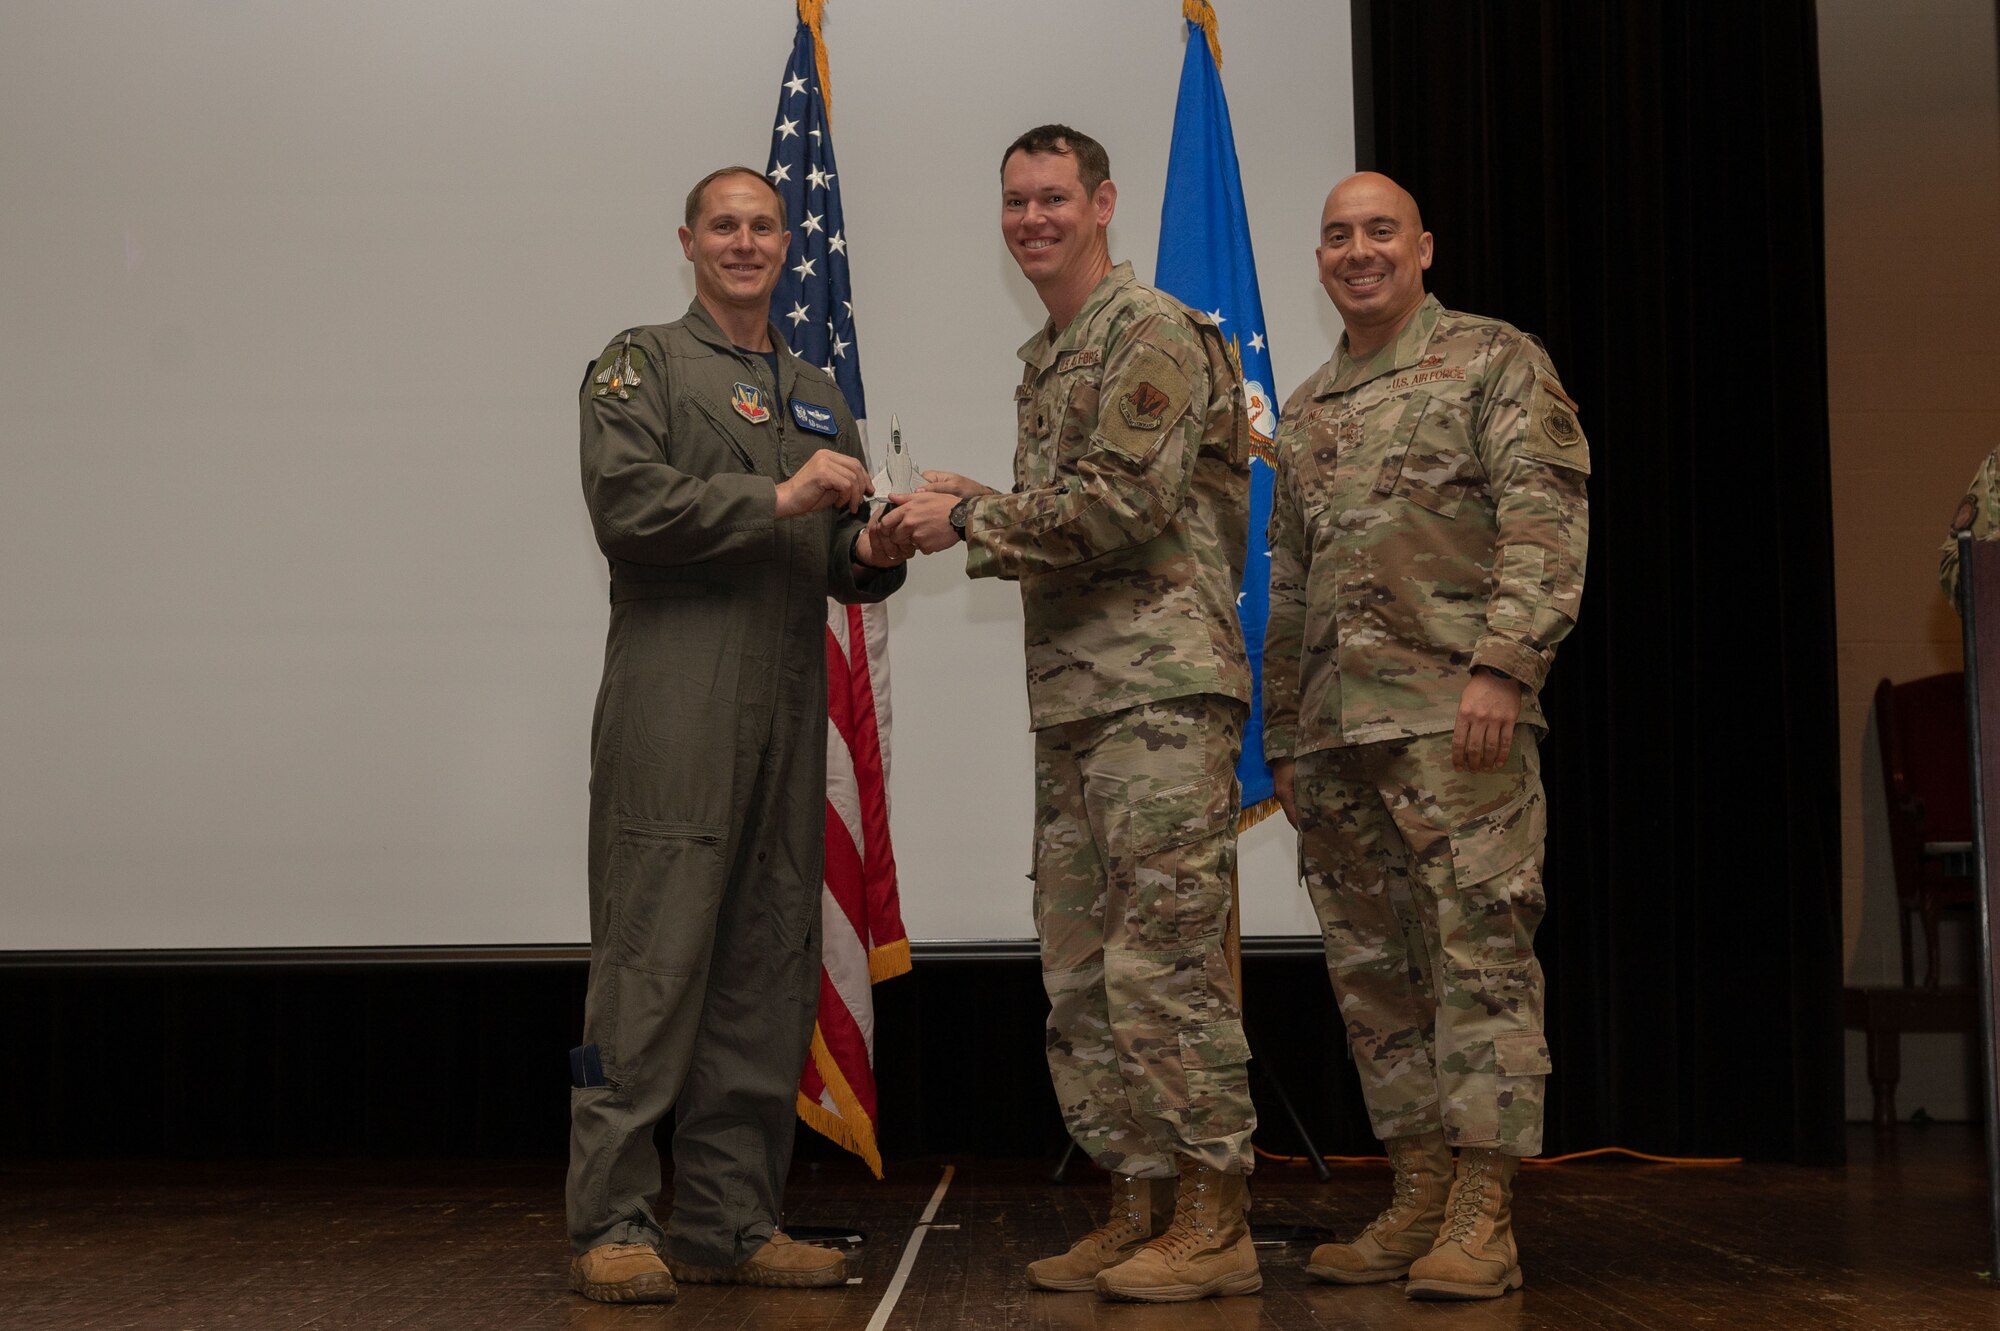 Lt Col. Timothy Kirchner, center, 4th Force Support Squadron commander, receives the Honor Guardsman of the Quarter award from Col. Lucas Teel, left, 4th Fighter Wing commander, and Chief Master Sgt. Peter Martinez, 4th FW command chief, on behalf of Airman 1st Class Denzell Foyles, 4th Equipment Maintenance Squadron nondestructive inspection apprentice, during the 4th FW 1st Quarter Awards Ceremony at Seymour Johnson Air Force Base, North Carolina, May 5, 2023. Quarterly awards were awarded to Airmen and civilians in 12 different categories, to recognize the recipients exceptional work. (U.S. Air Force photo by Airman 1st Class Rebecca Sirimarco-Lang)